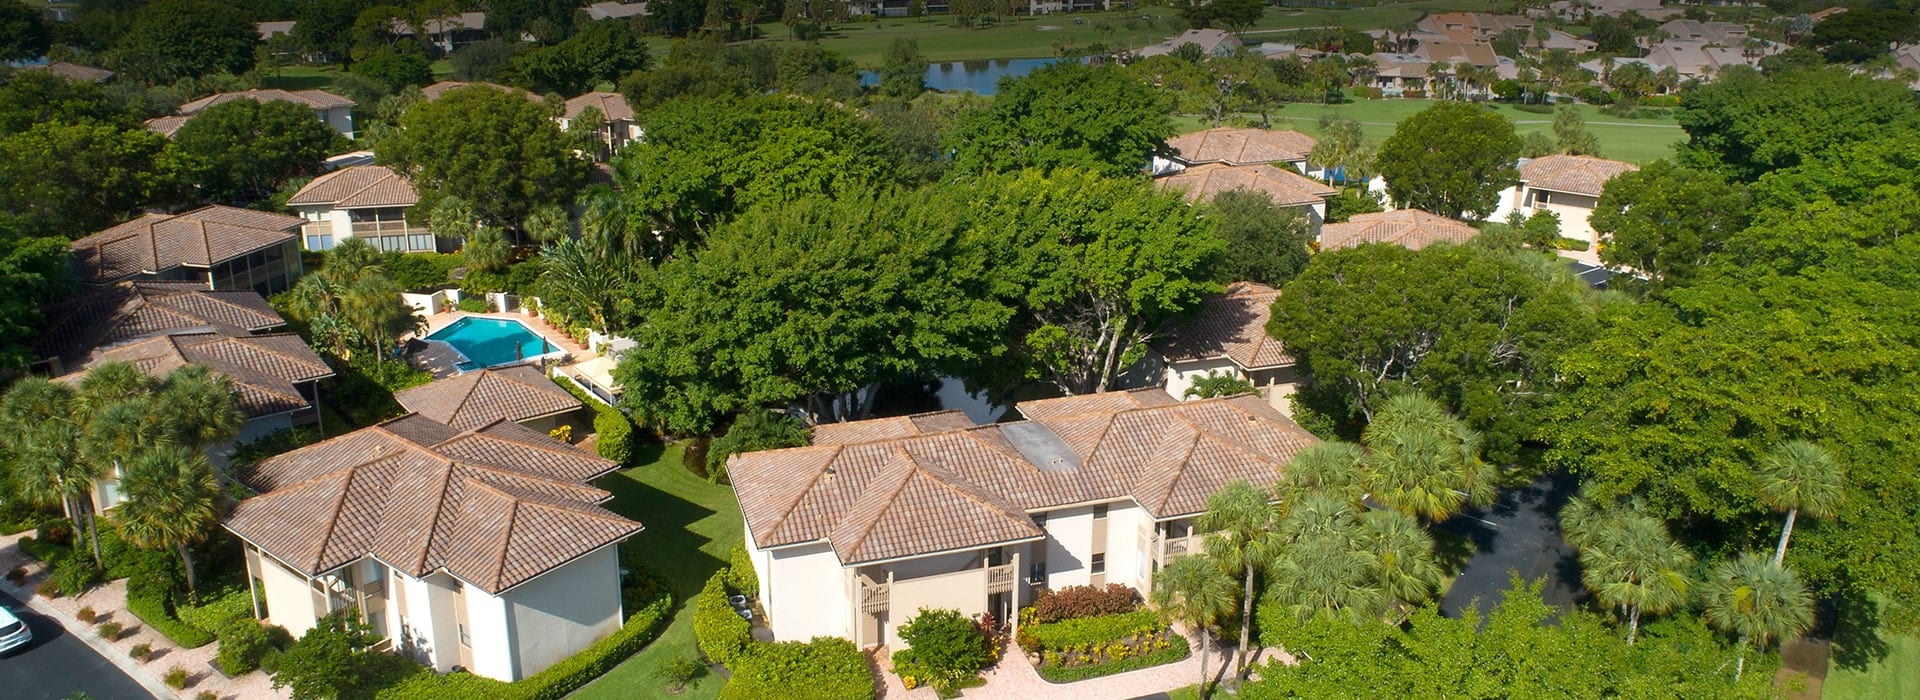 Quail Hollow, a community of townhomes in Boca West surrounded by mature trees